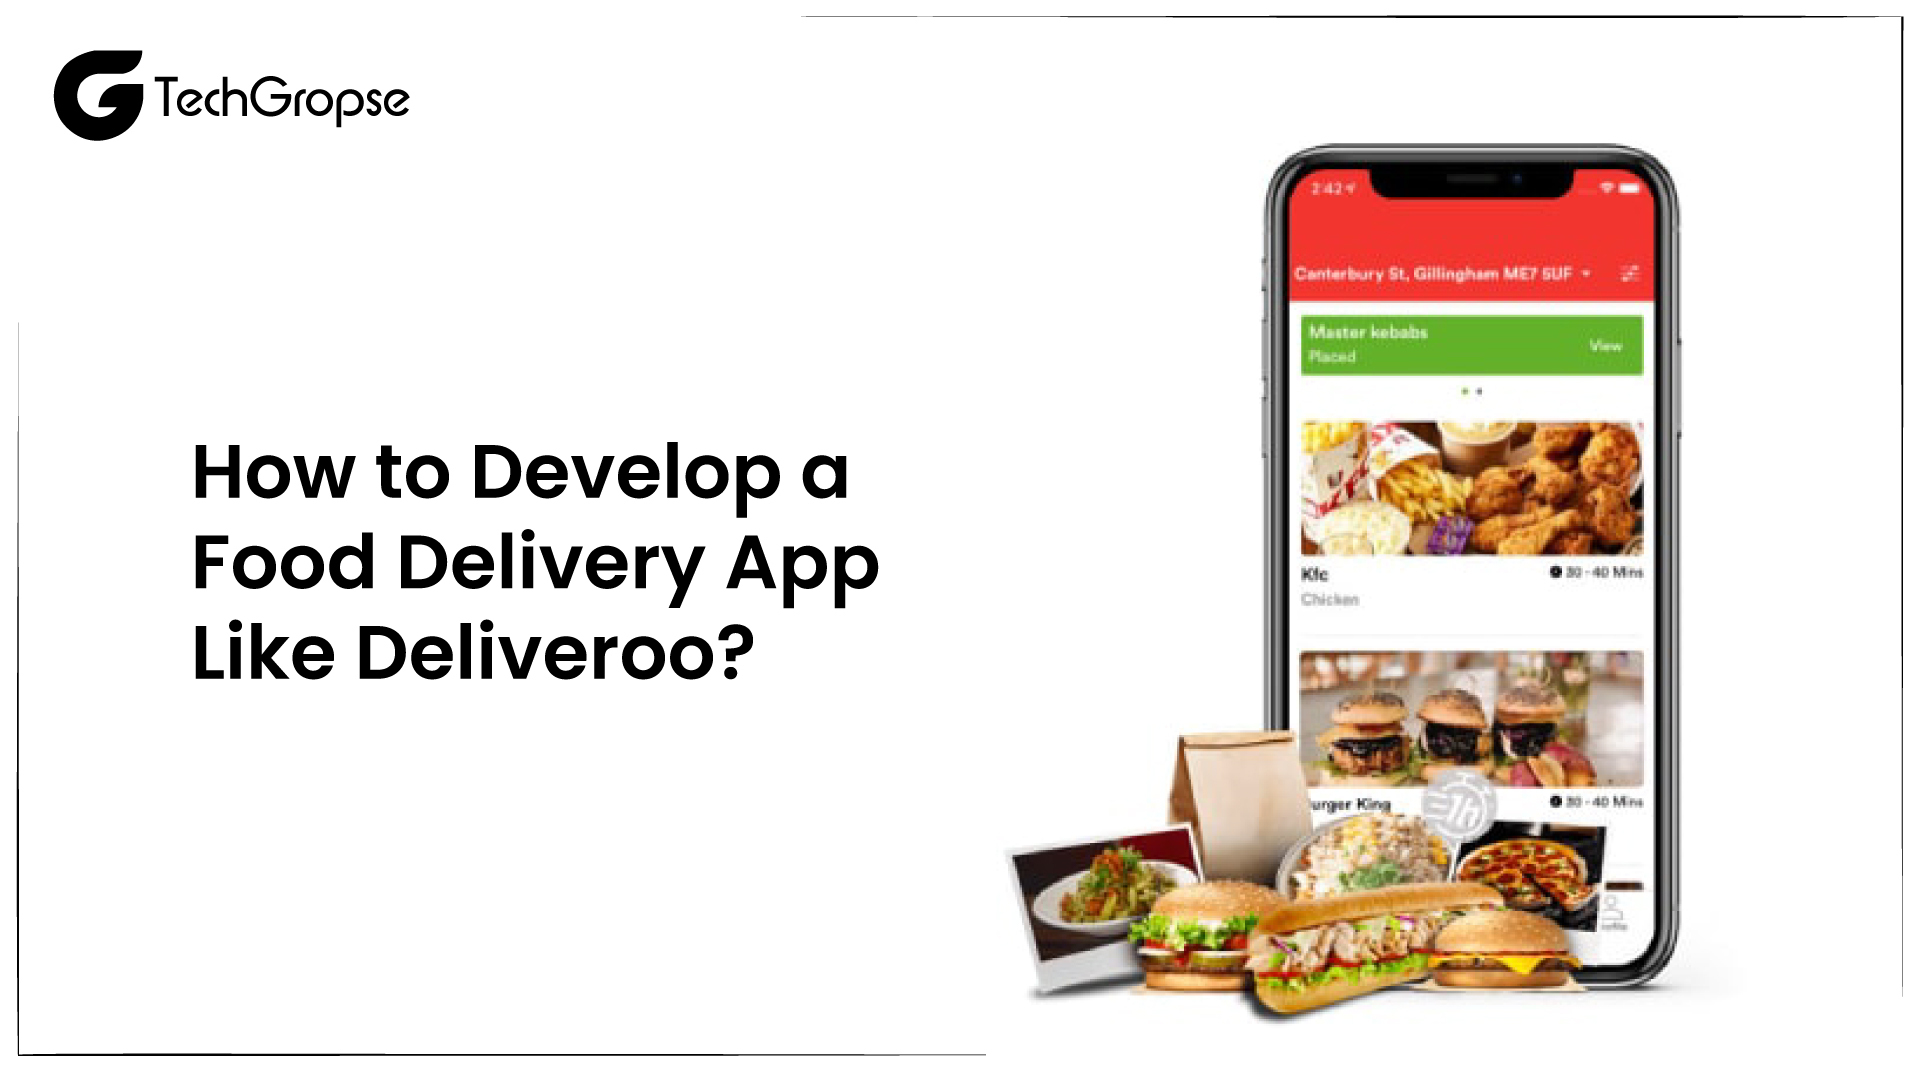 How to Develop a Food Delivery App Like Deliveroo?